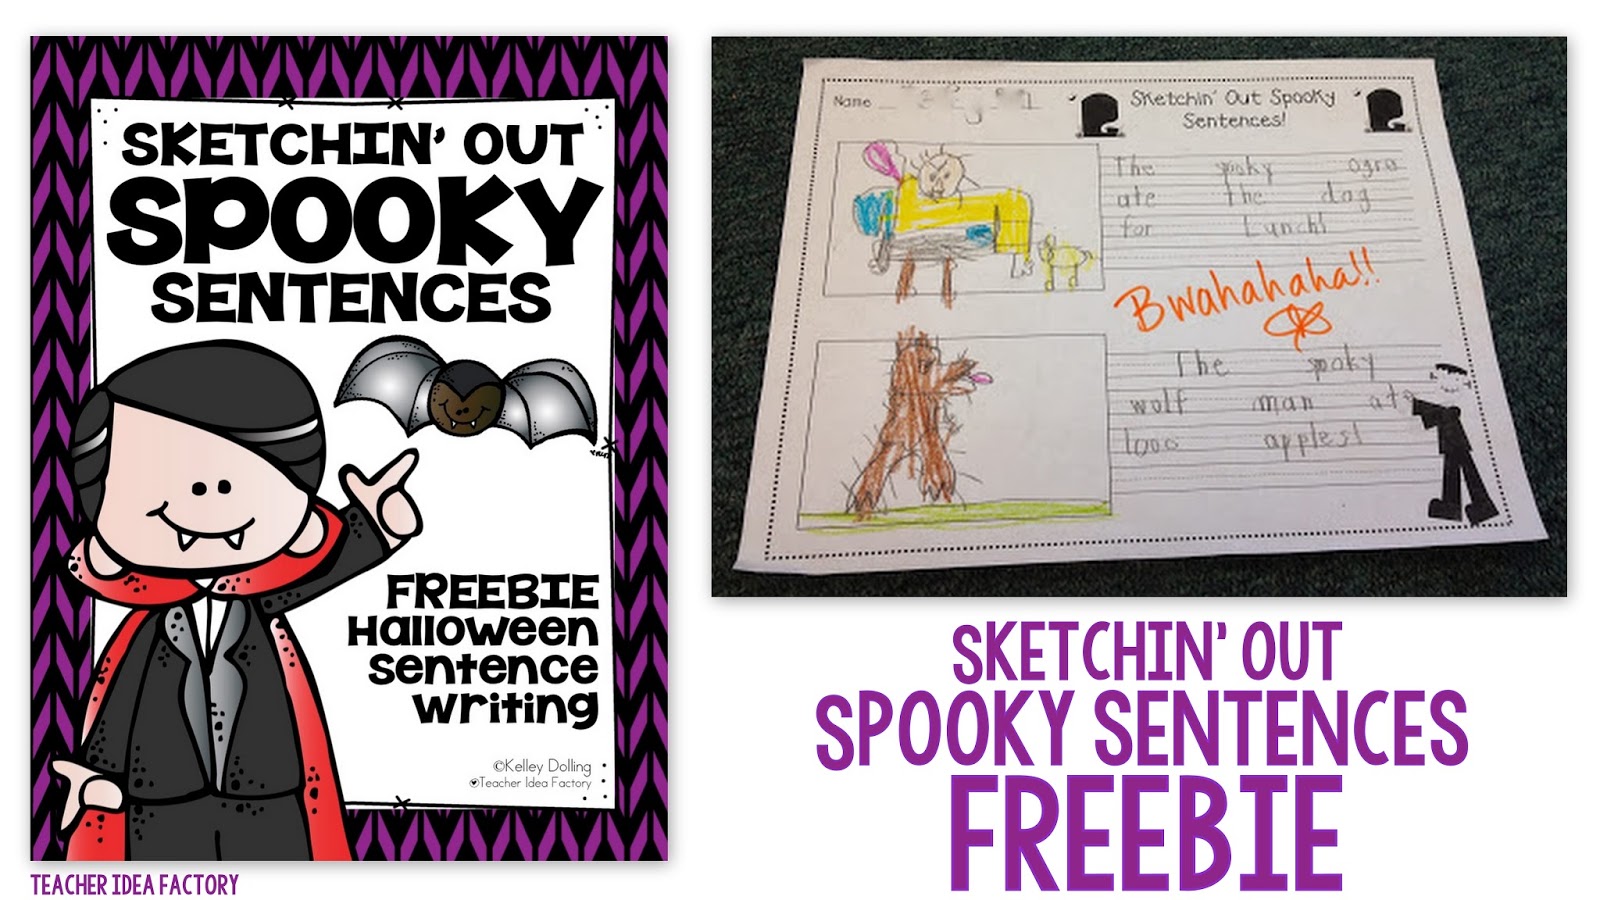 spooky-parts-of-speech-worksheet-free-esl-printable-worksheets-made-by-teachers-parts-of